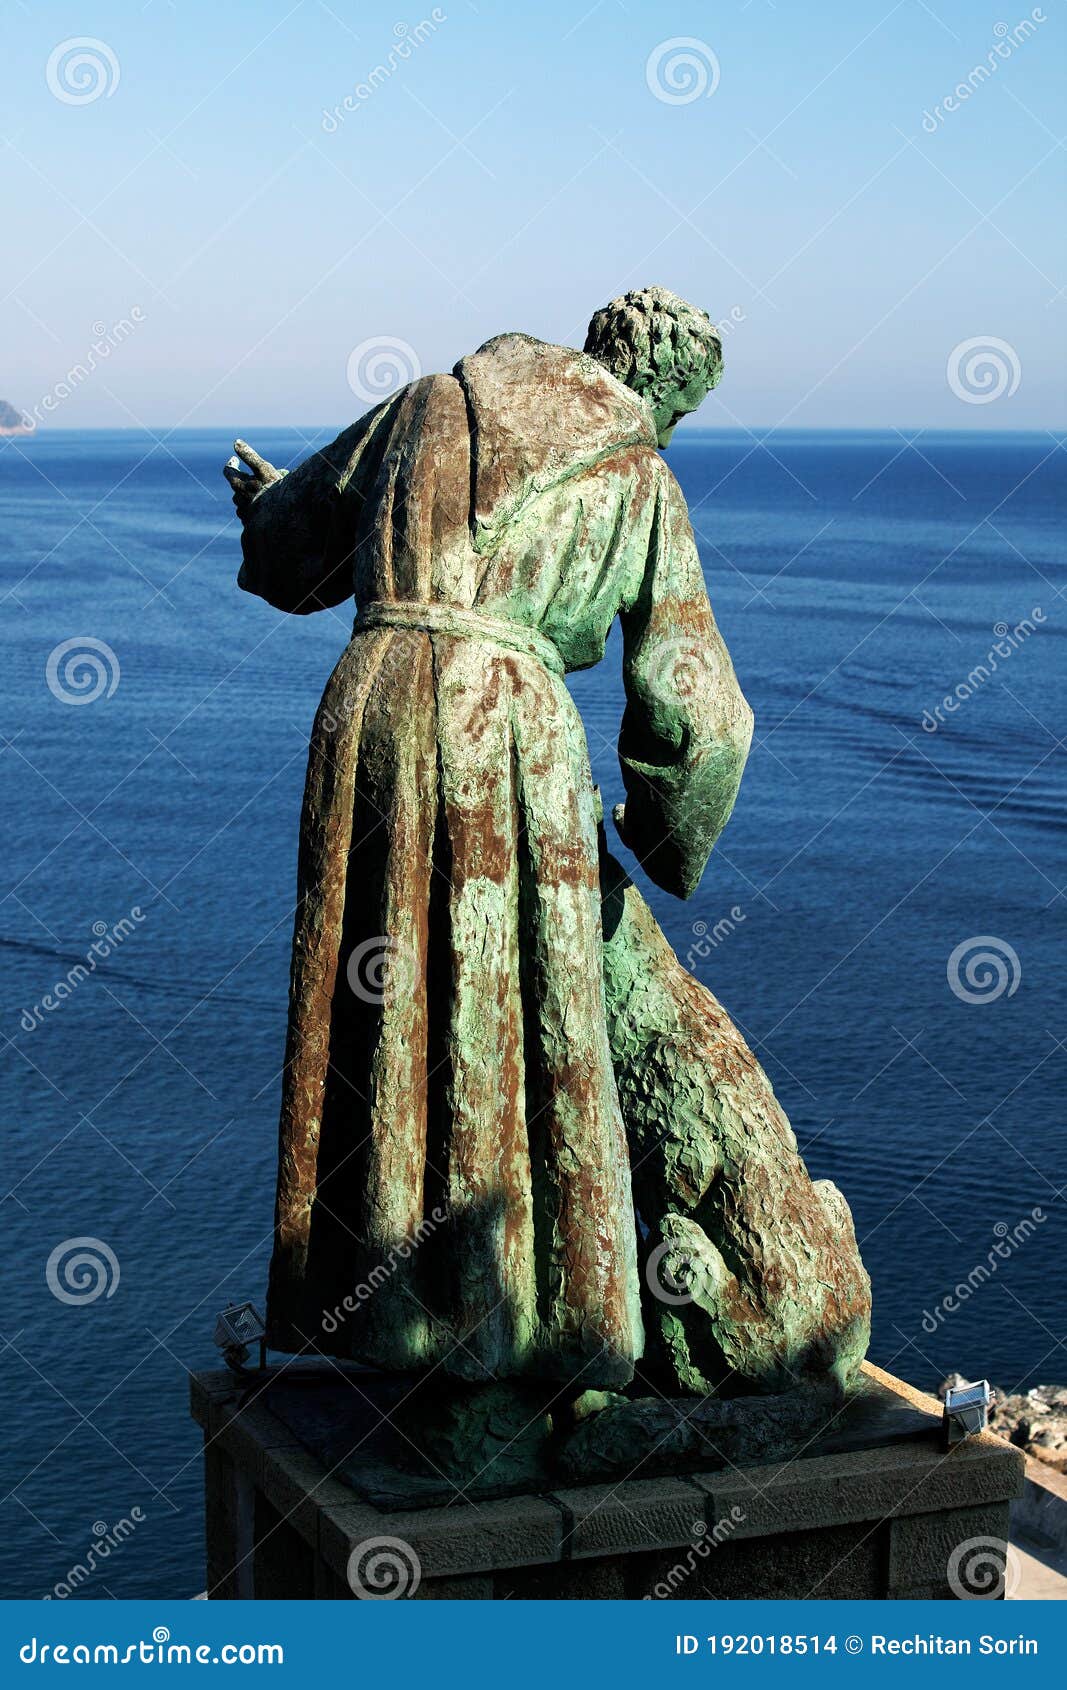 the statue of saint francis of assisi caressing the wolf of gubbio, monterosso al mare, cinque terre, italy.